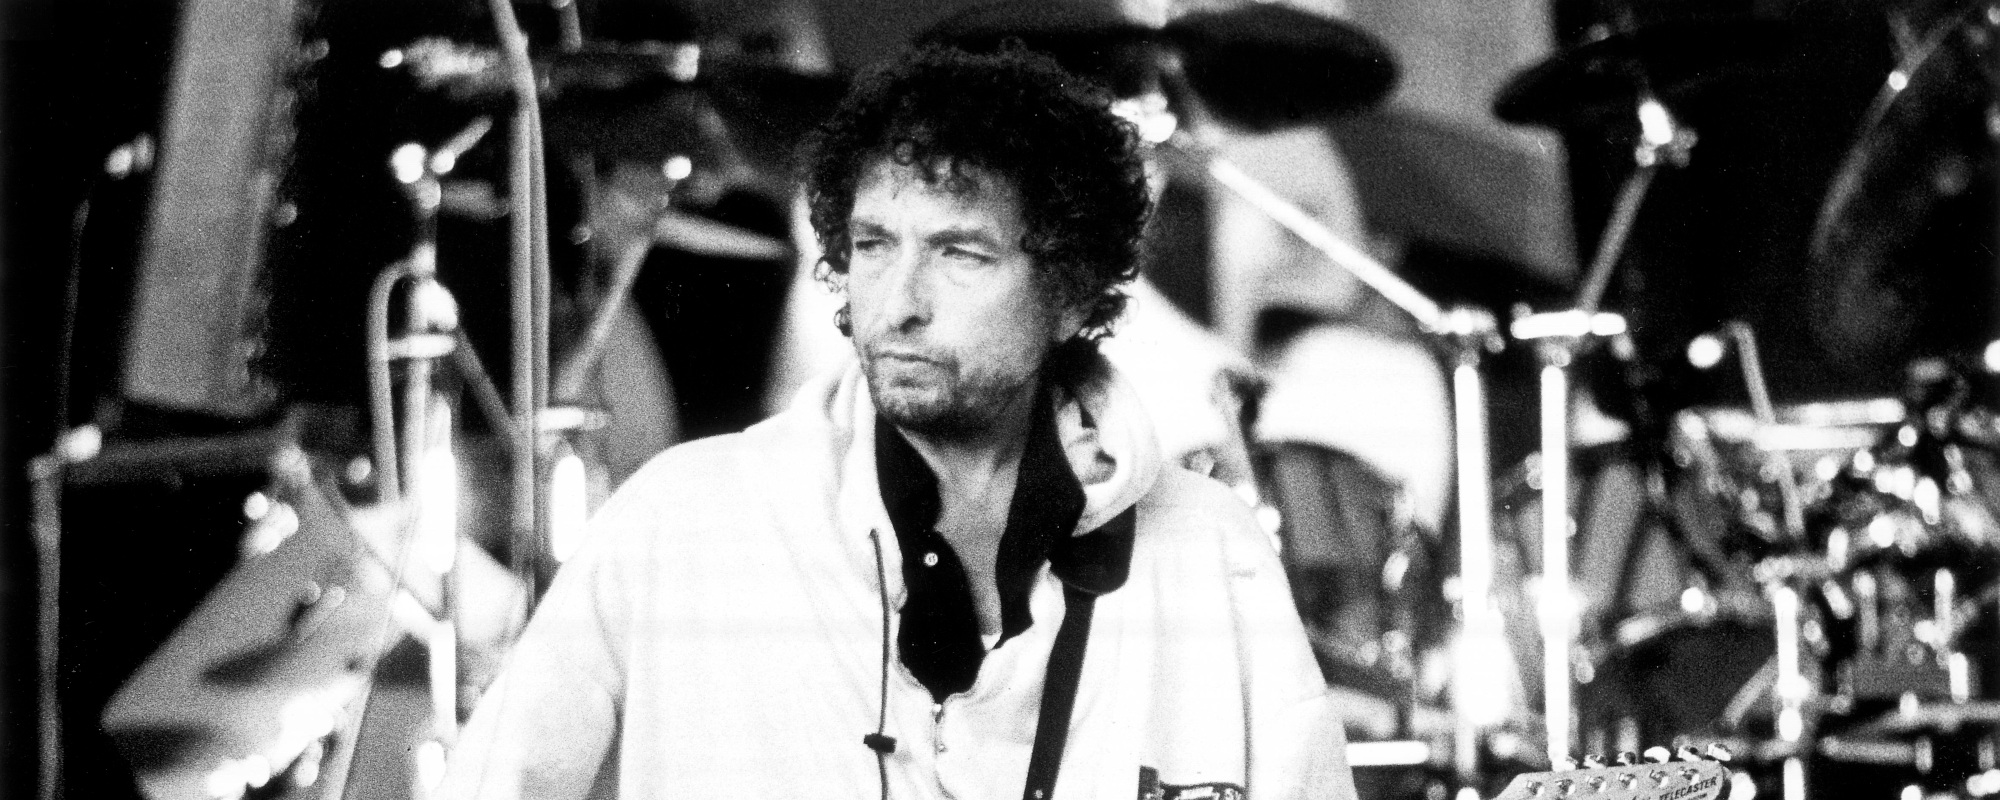 The Poetic Meaning Behind “A Hard Rain’s A-Gonna Fall” by Bob Dylan